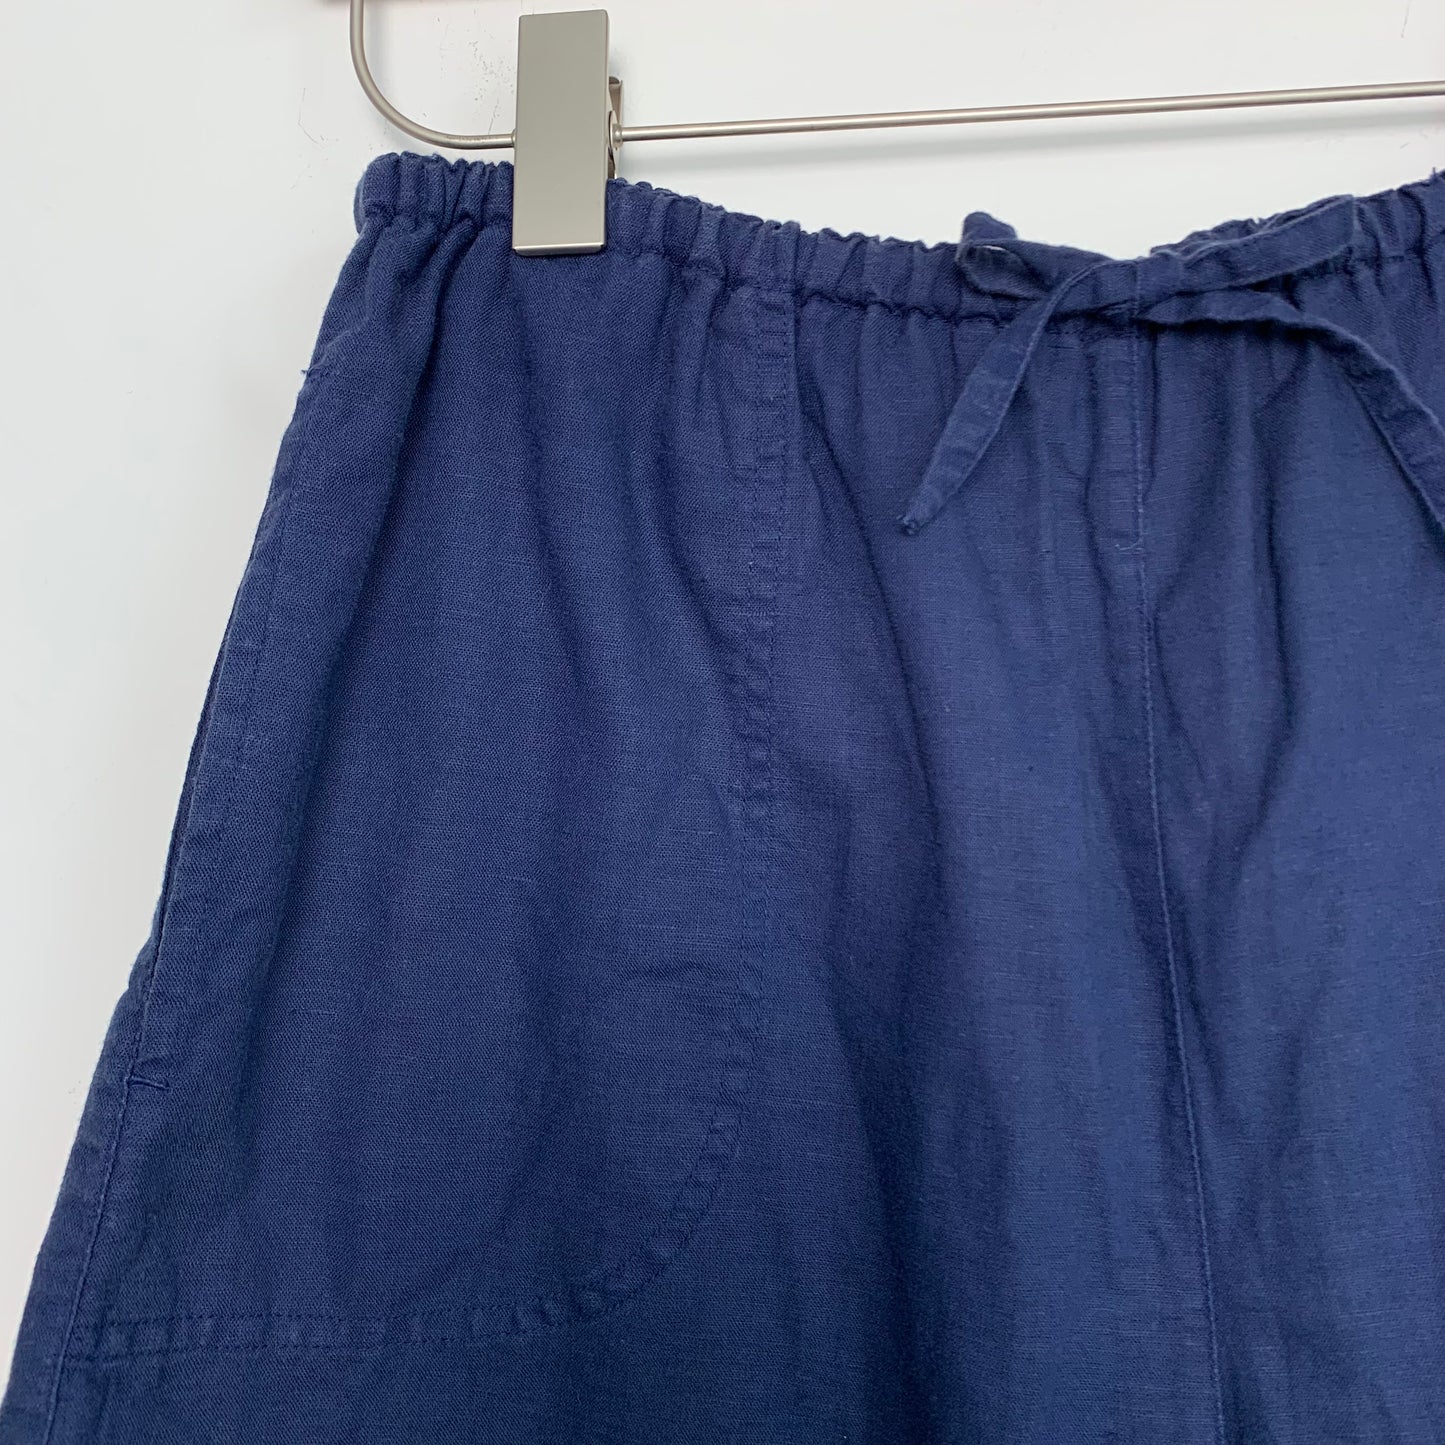 Vintage White Stag Navy Blue Drawstring Shorts Linen Cotton Small